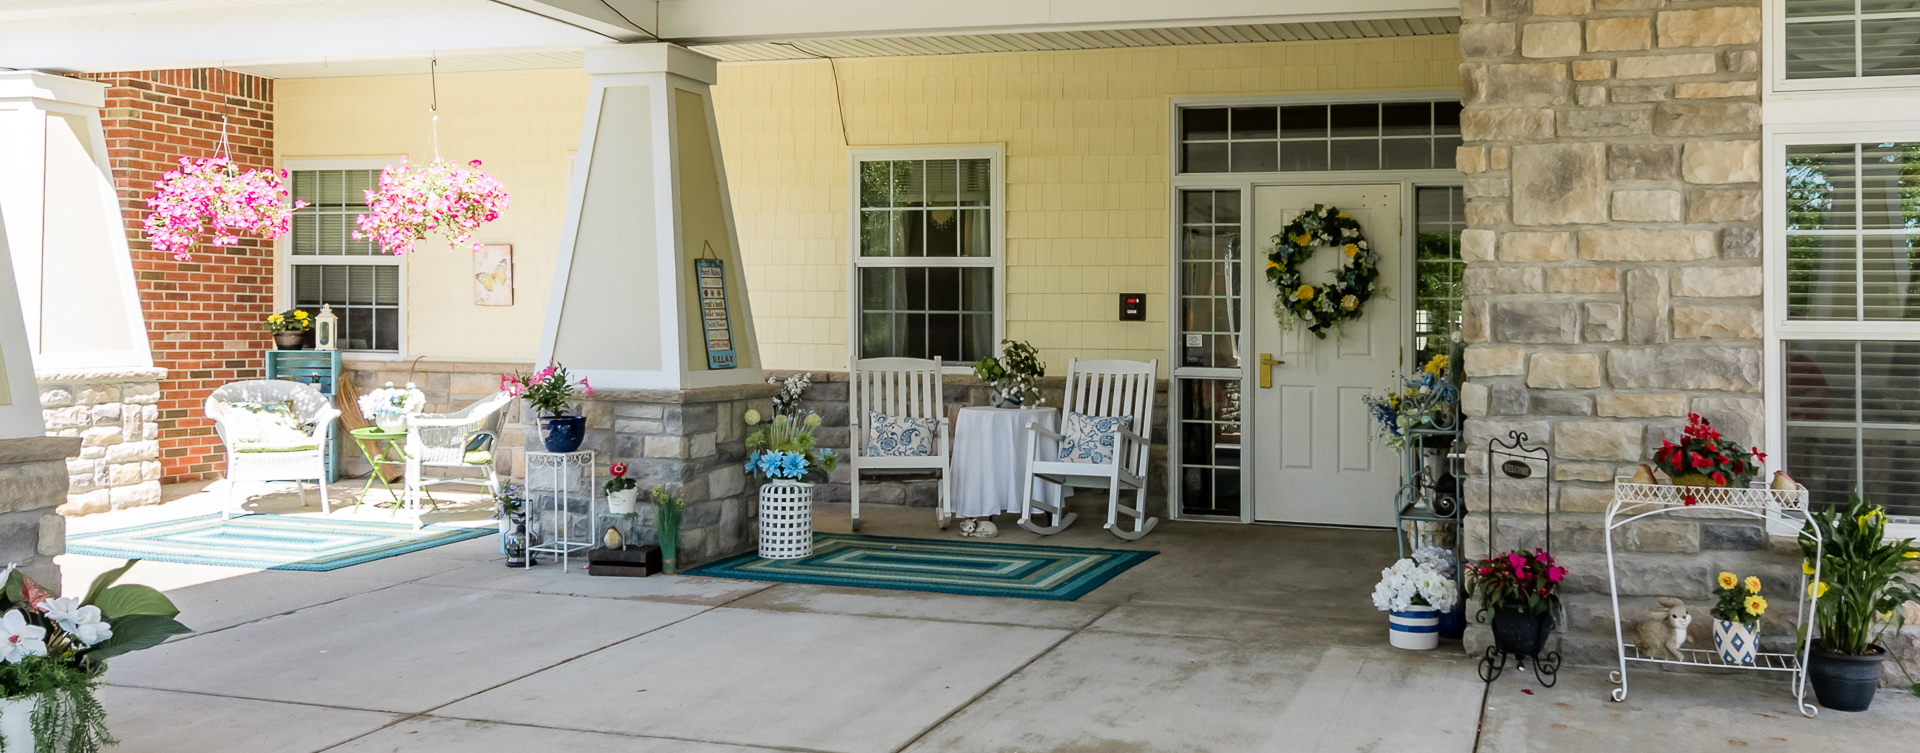 Enjoy conversations with friends on the porch at Bickford of Midland